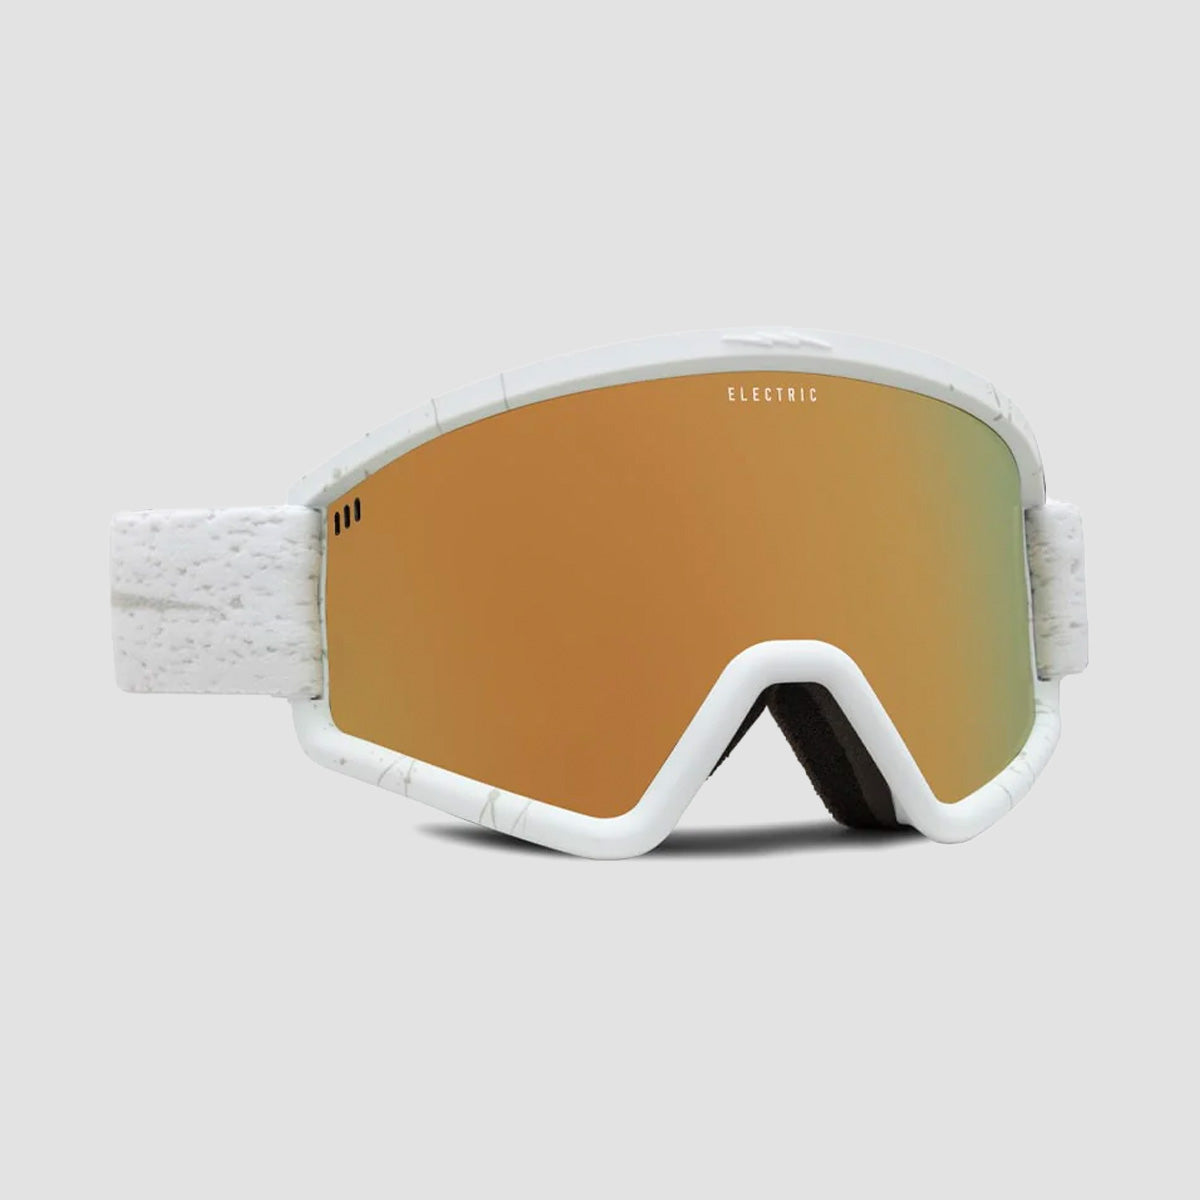 Electric Hex Snow Goggles Matte Speckled White/Gold Chrome With Bonus Lense